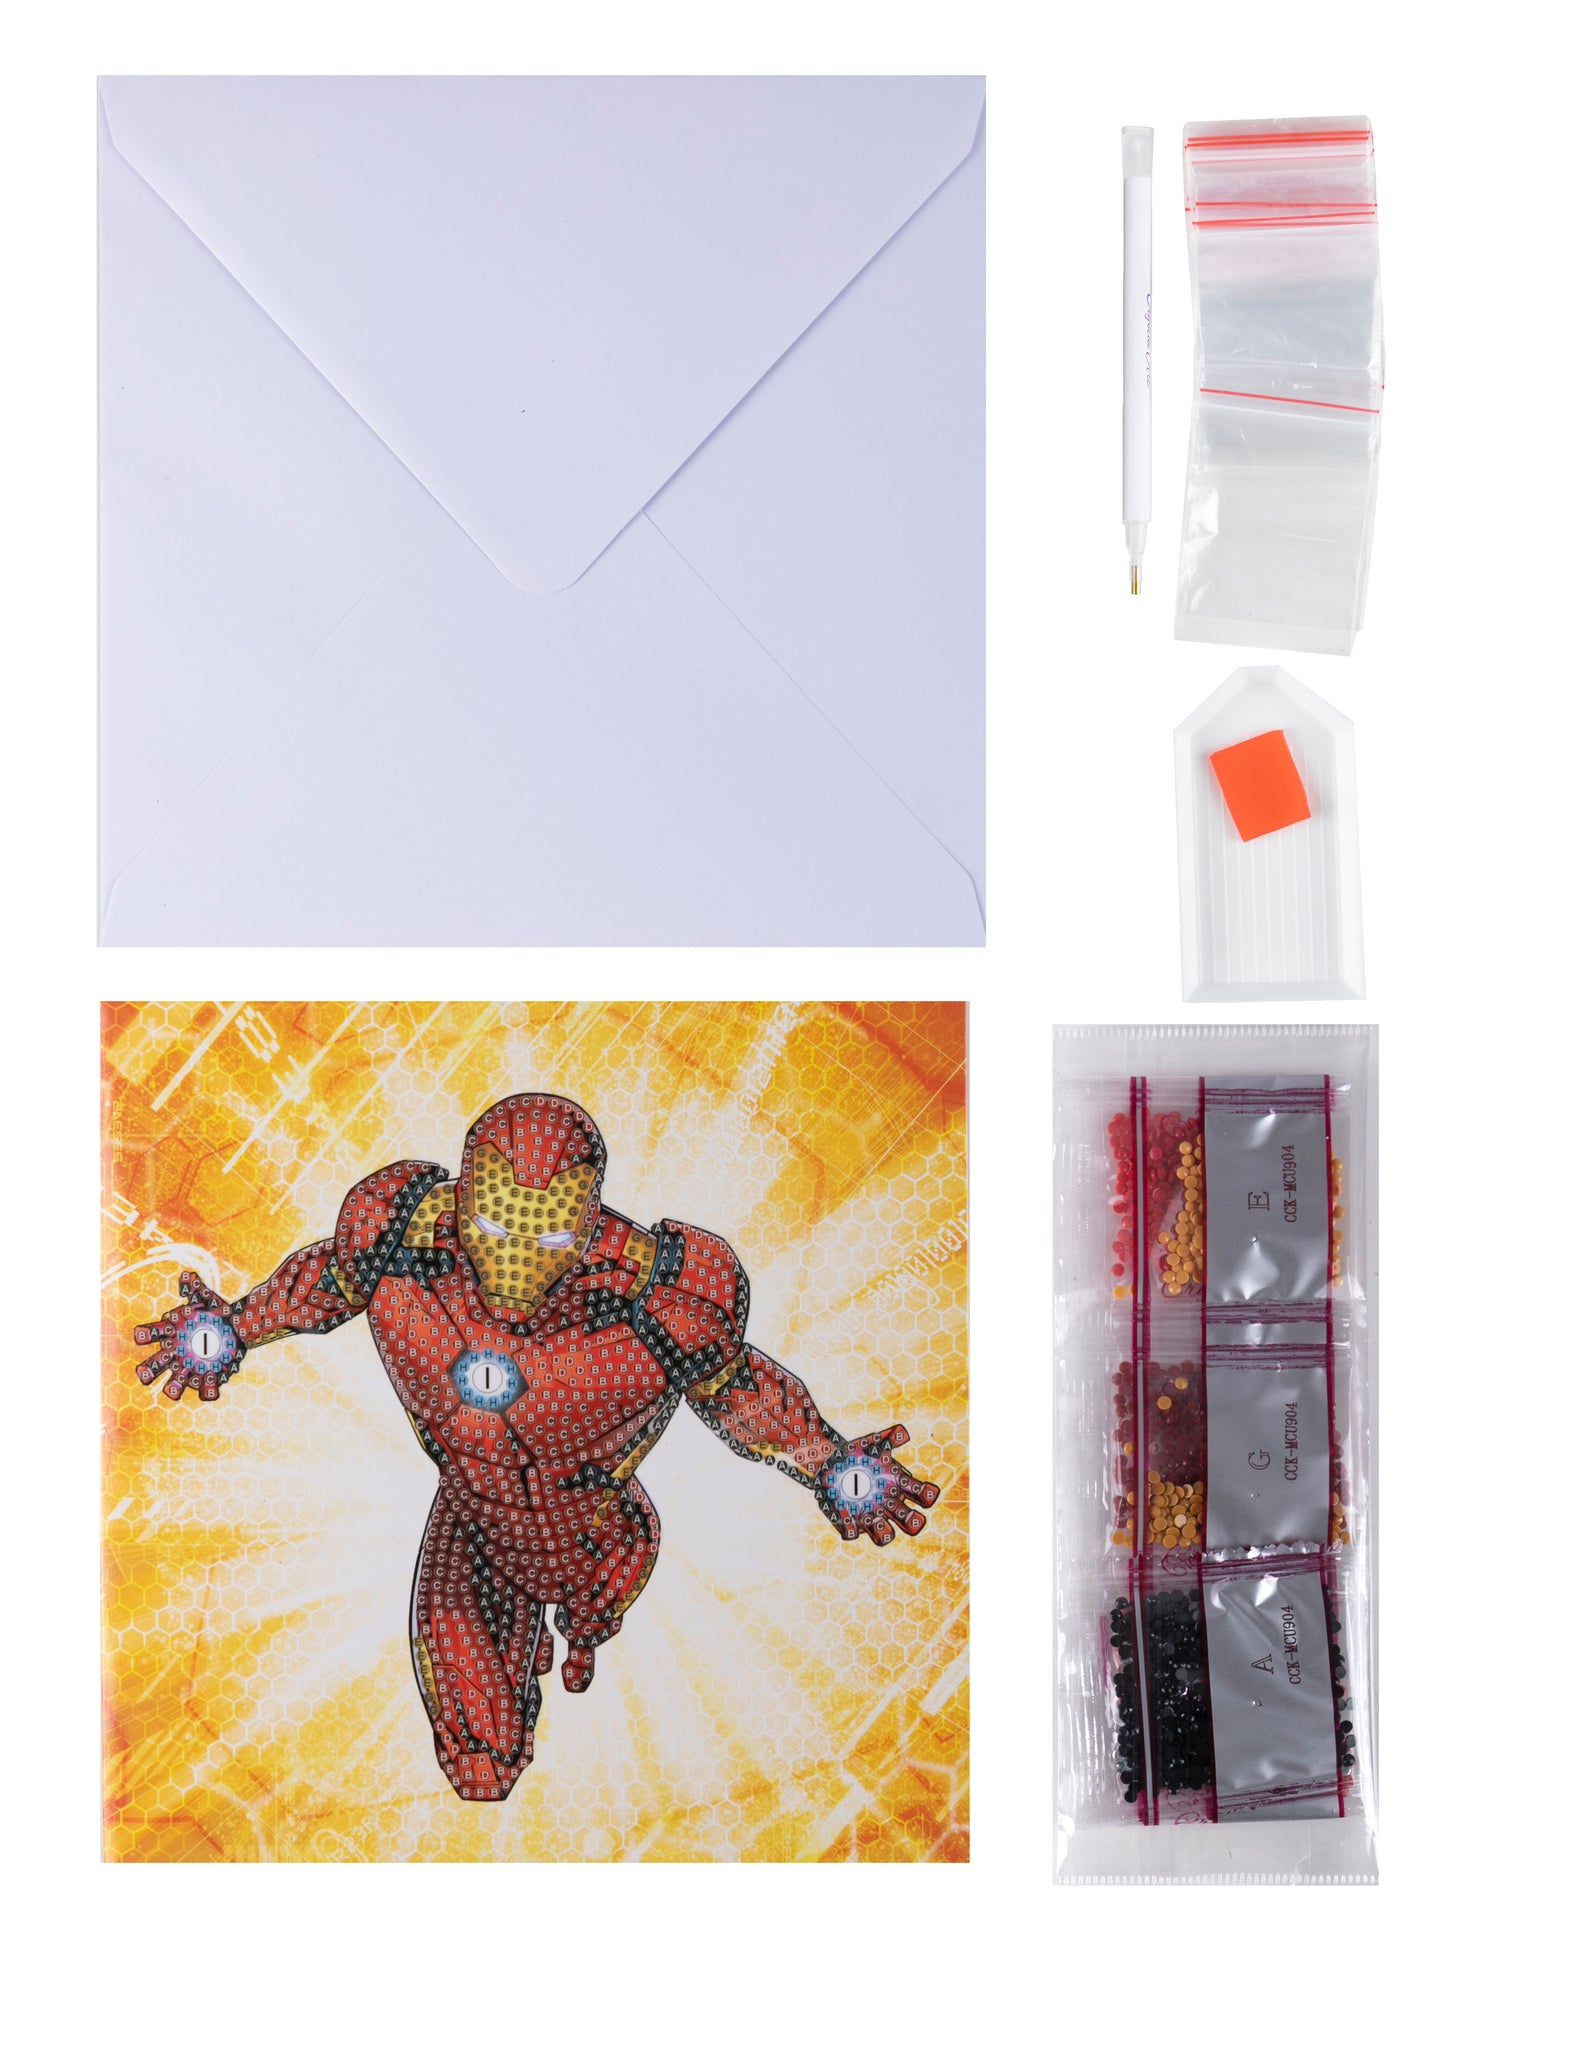 SPIDERMAN Marvel D.I.Y crystal art Greeting card or picture Craft Buddy  18x18cm